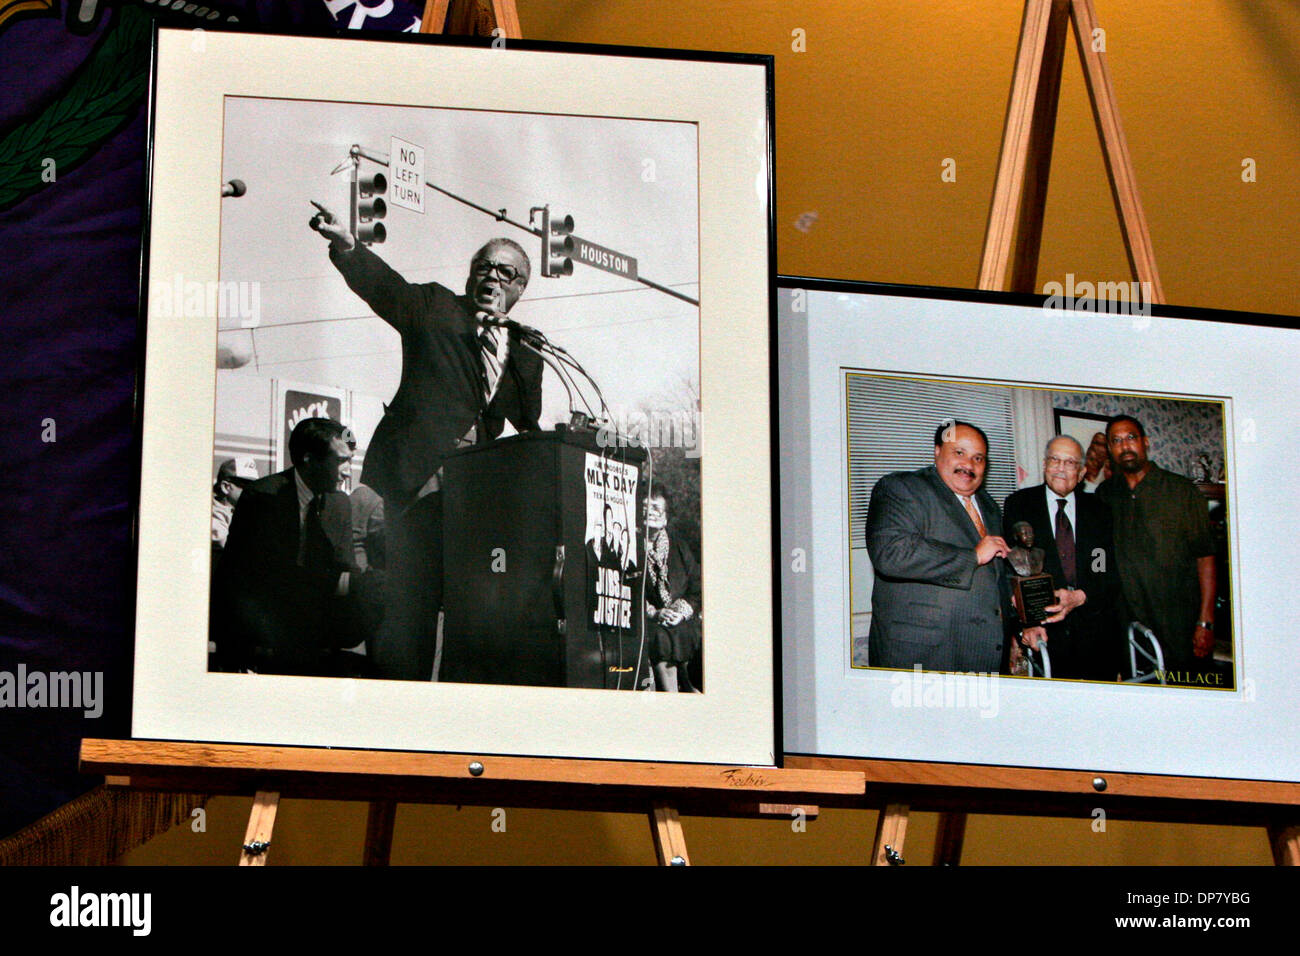 Nov 30, 2006; Falls City, TX, USA; Historic photos of Rev. Claude Black decorate a party in his honor at San Fernando Cathedral's community center, Thursday, November 30, 2006.  Mandatory Credit: Photo by Nicole Fruge/San Antonio Express-News/ZUMA Press. (©) Copyright 2006 by San Antonio Express-News Stock Photo